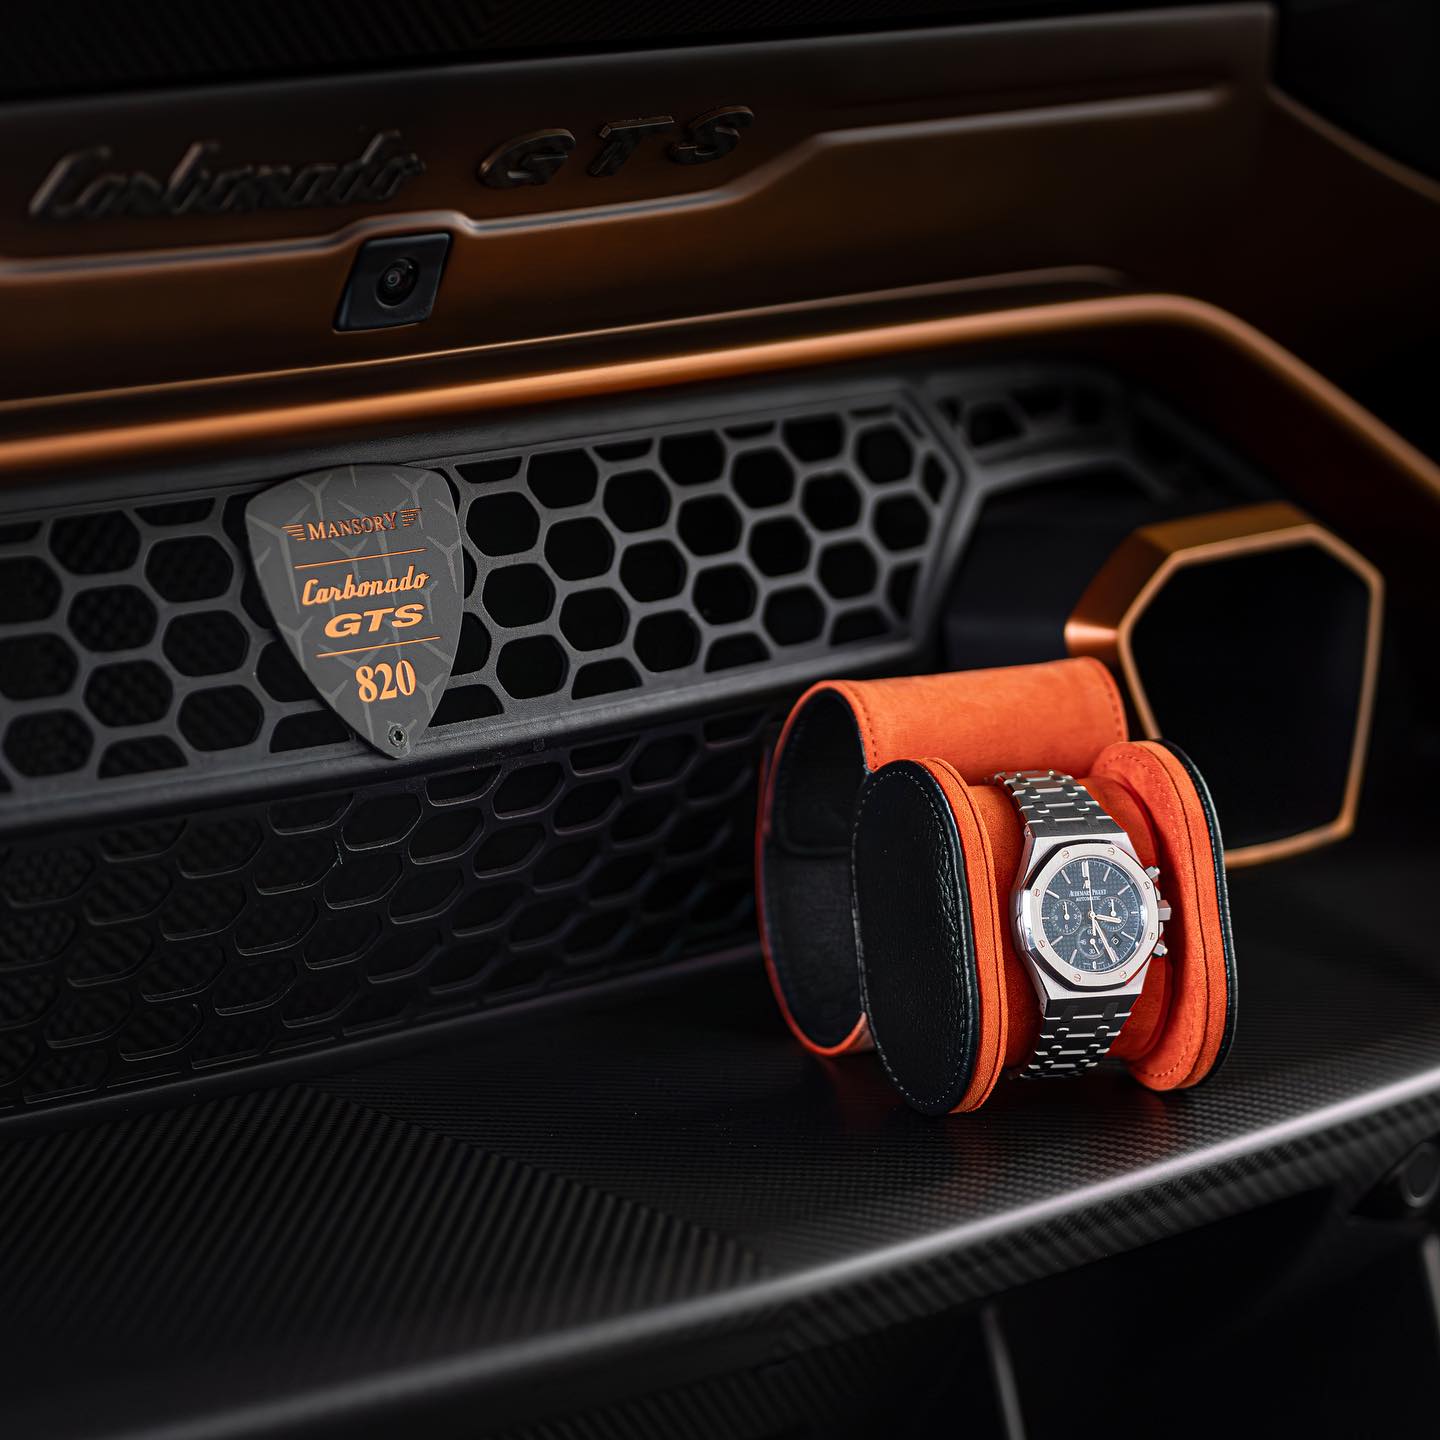 bao dj khaled combined with big narstie to launch a new watch collection project featuring the ferrari gts supercar customized by mansory 654b99e0ec6ca Dj Khaled Combined With Big Narstie To Launch A New Watch Collection Project Featuring The Ferrari 812 Gts Supercar, Customized By Mansory